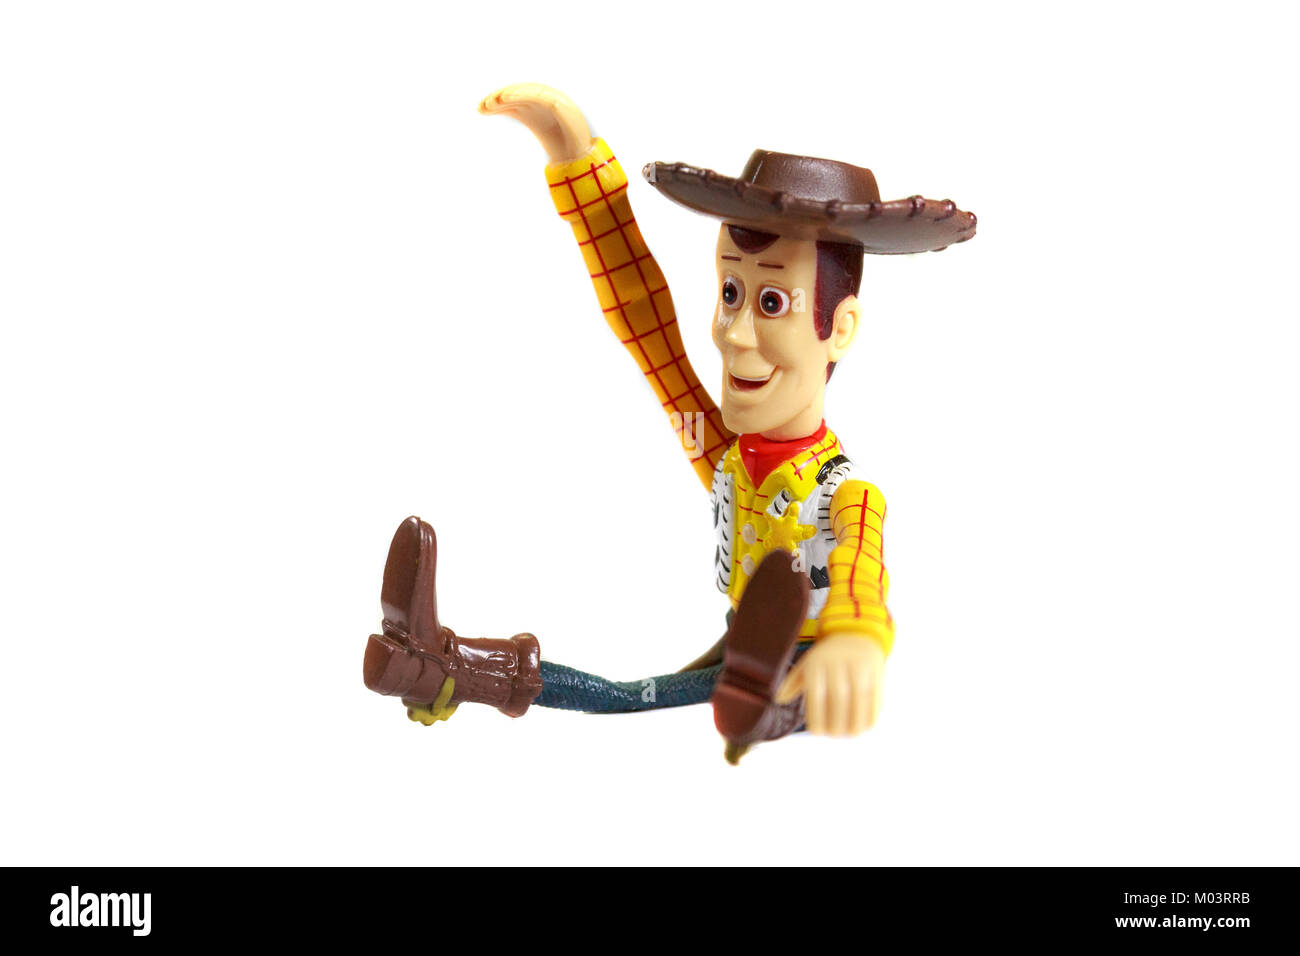 Woody, an Extremely Popular Disney Character from Toy Story Movie. Stock Photo